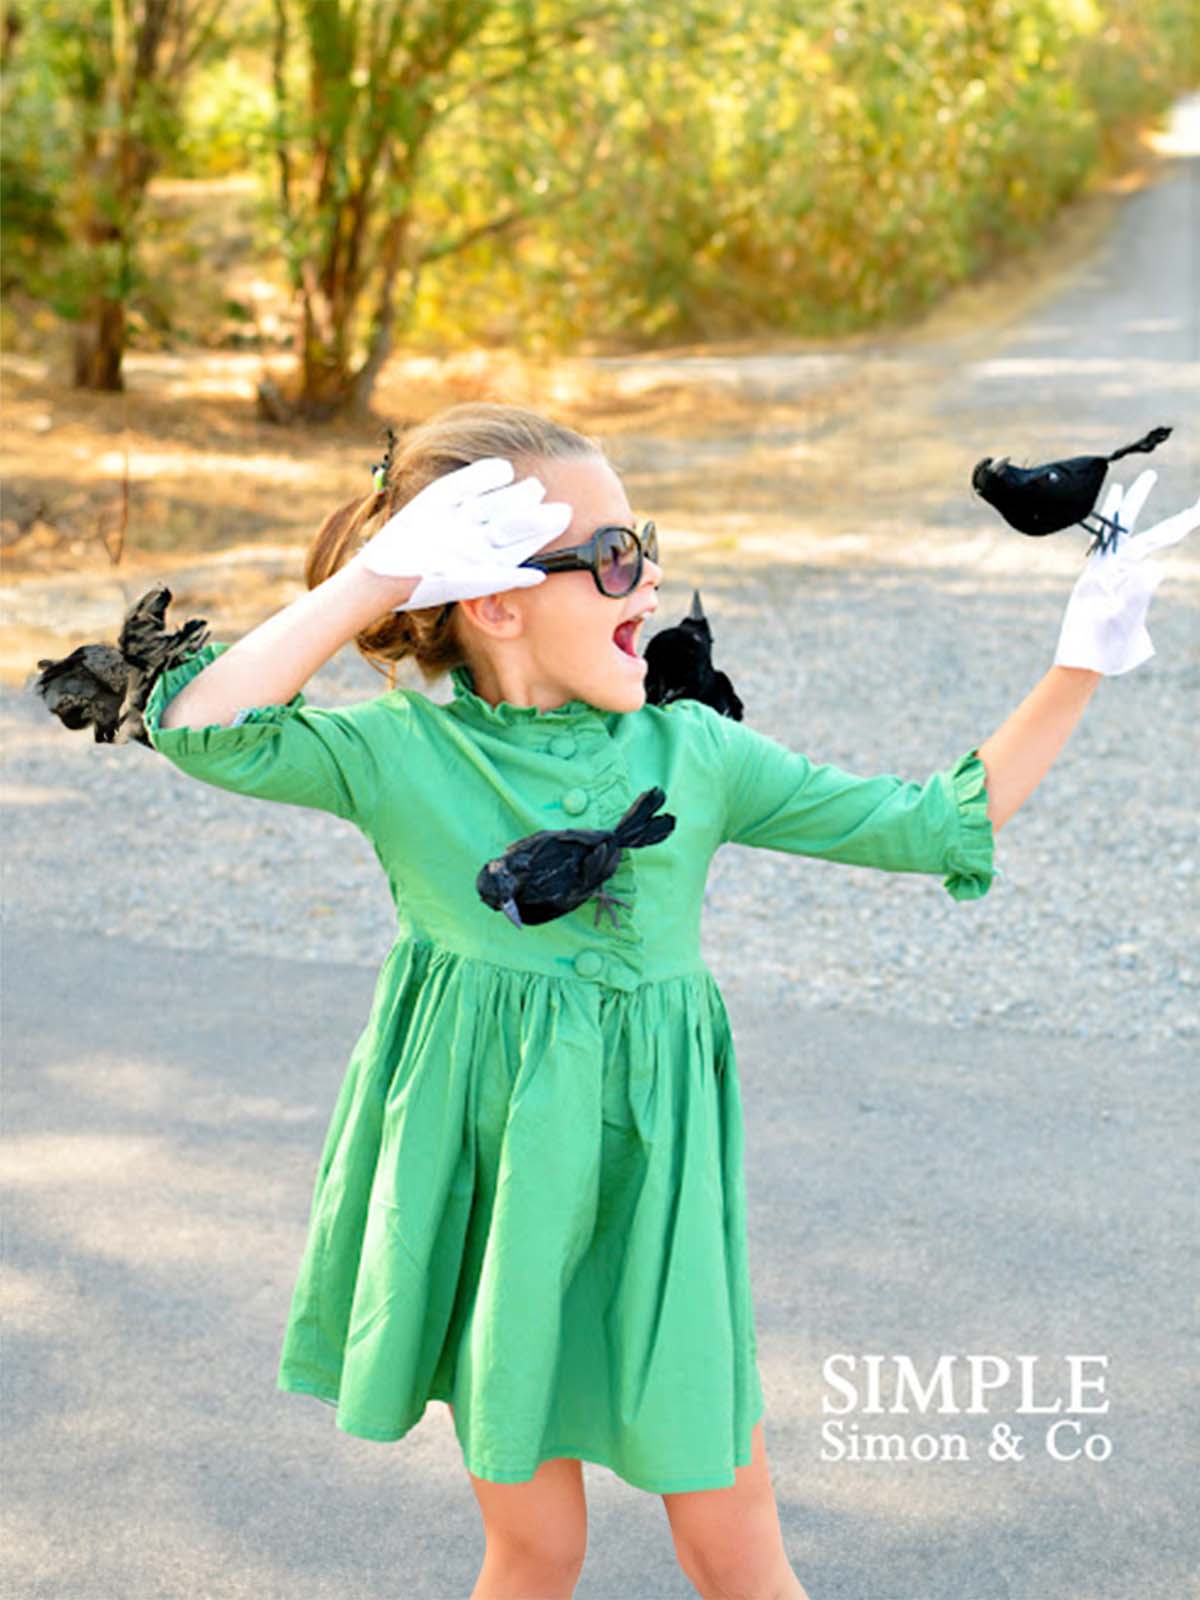 Girl in a green dress with fake black birds on her for a "The Birds" costume.